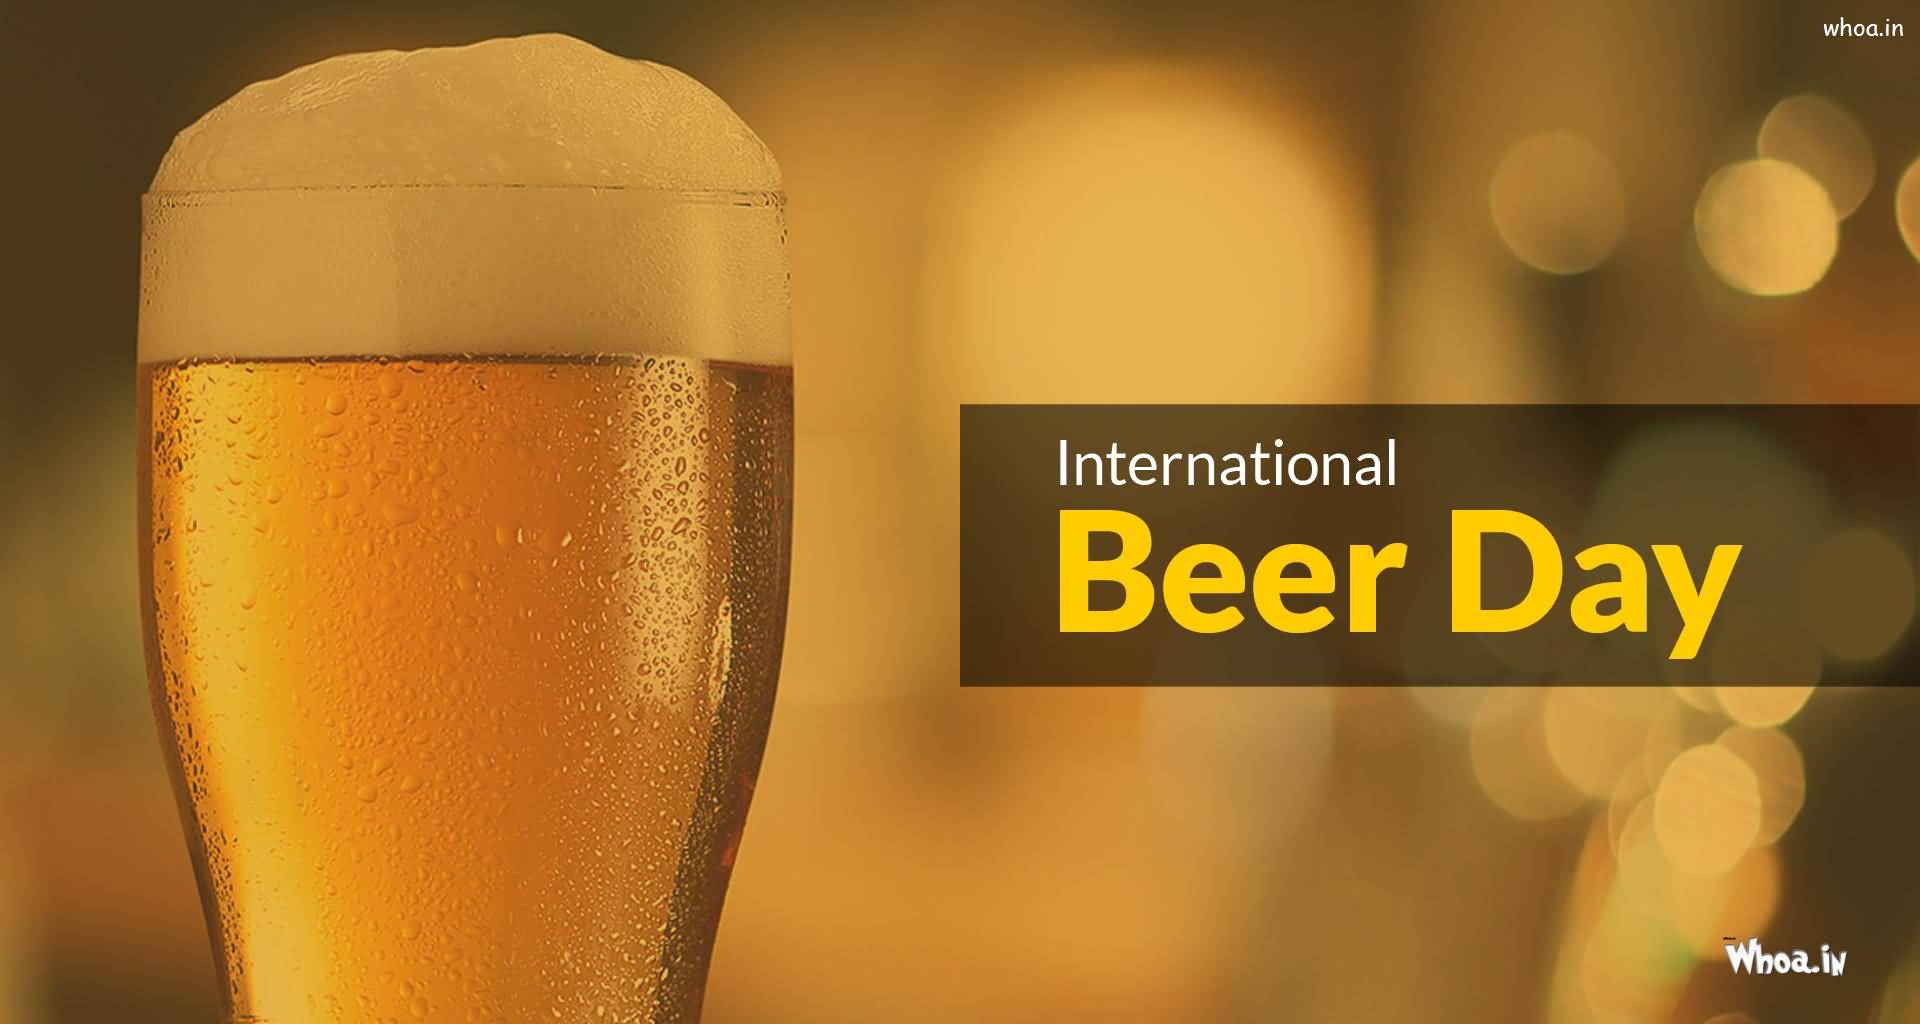 International Beer Day August 4th 2017 Poster